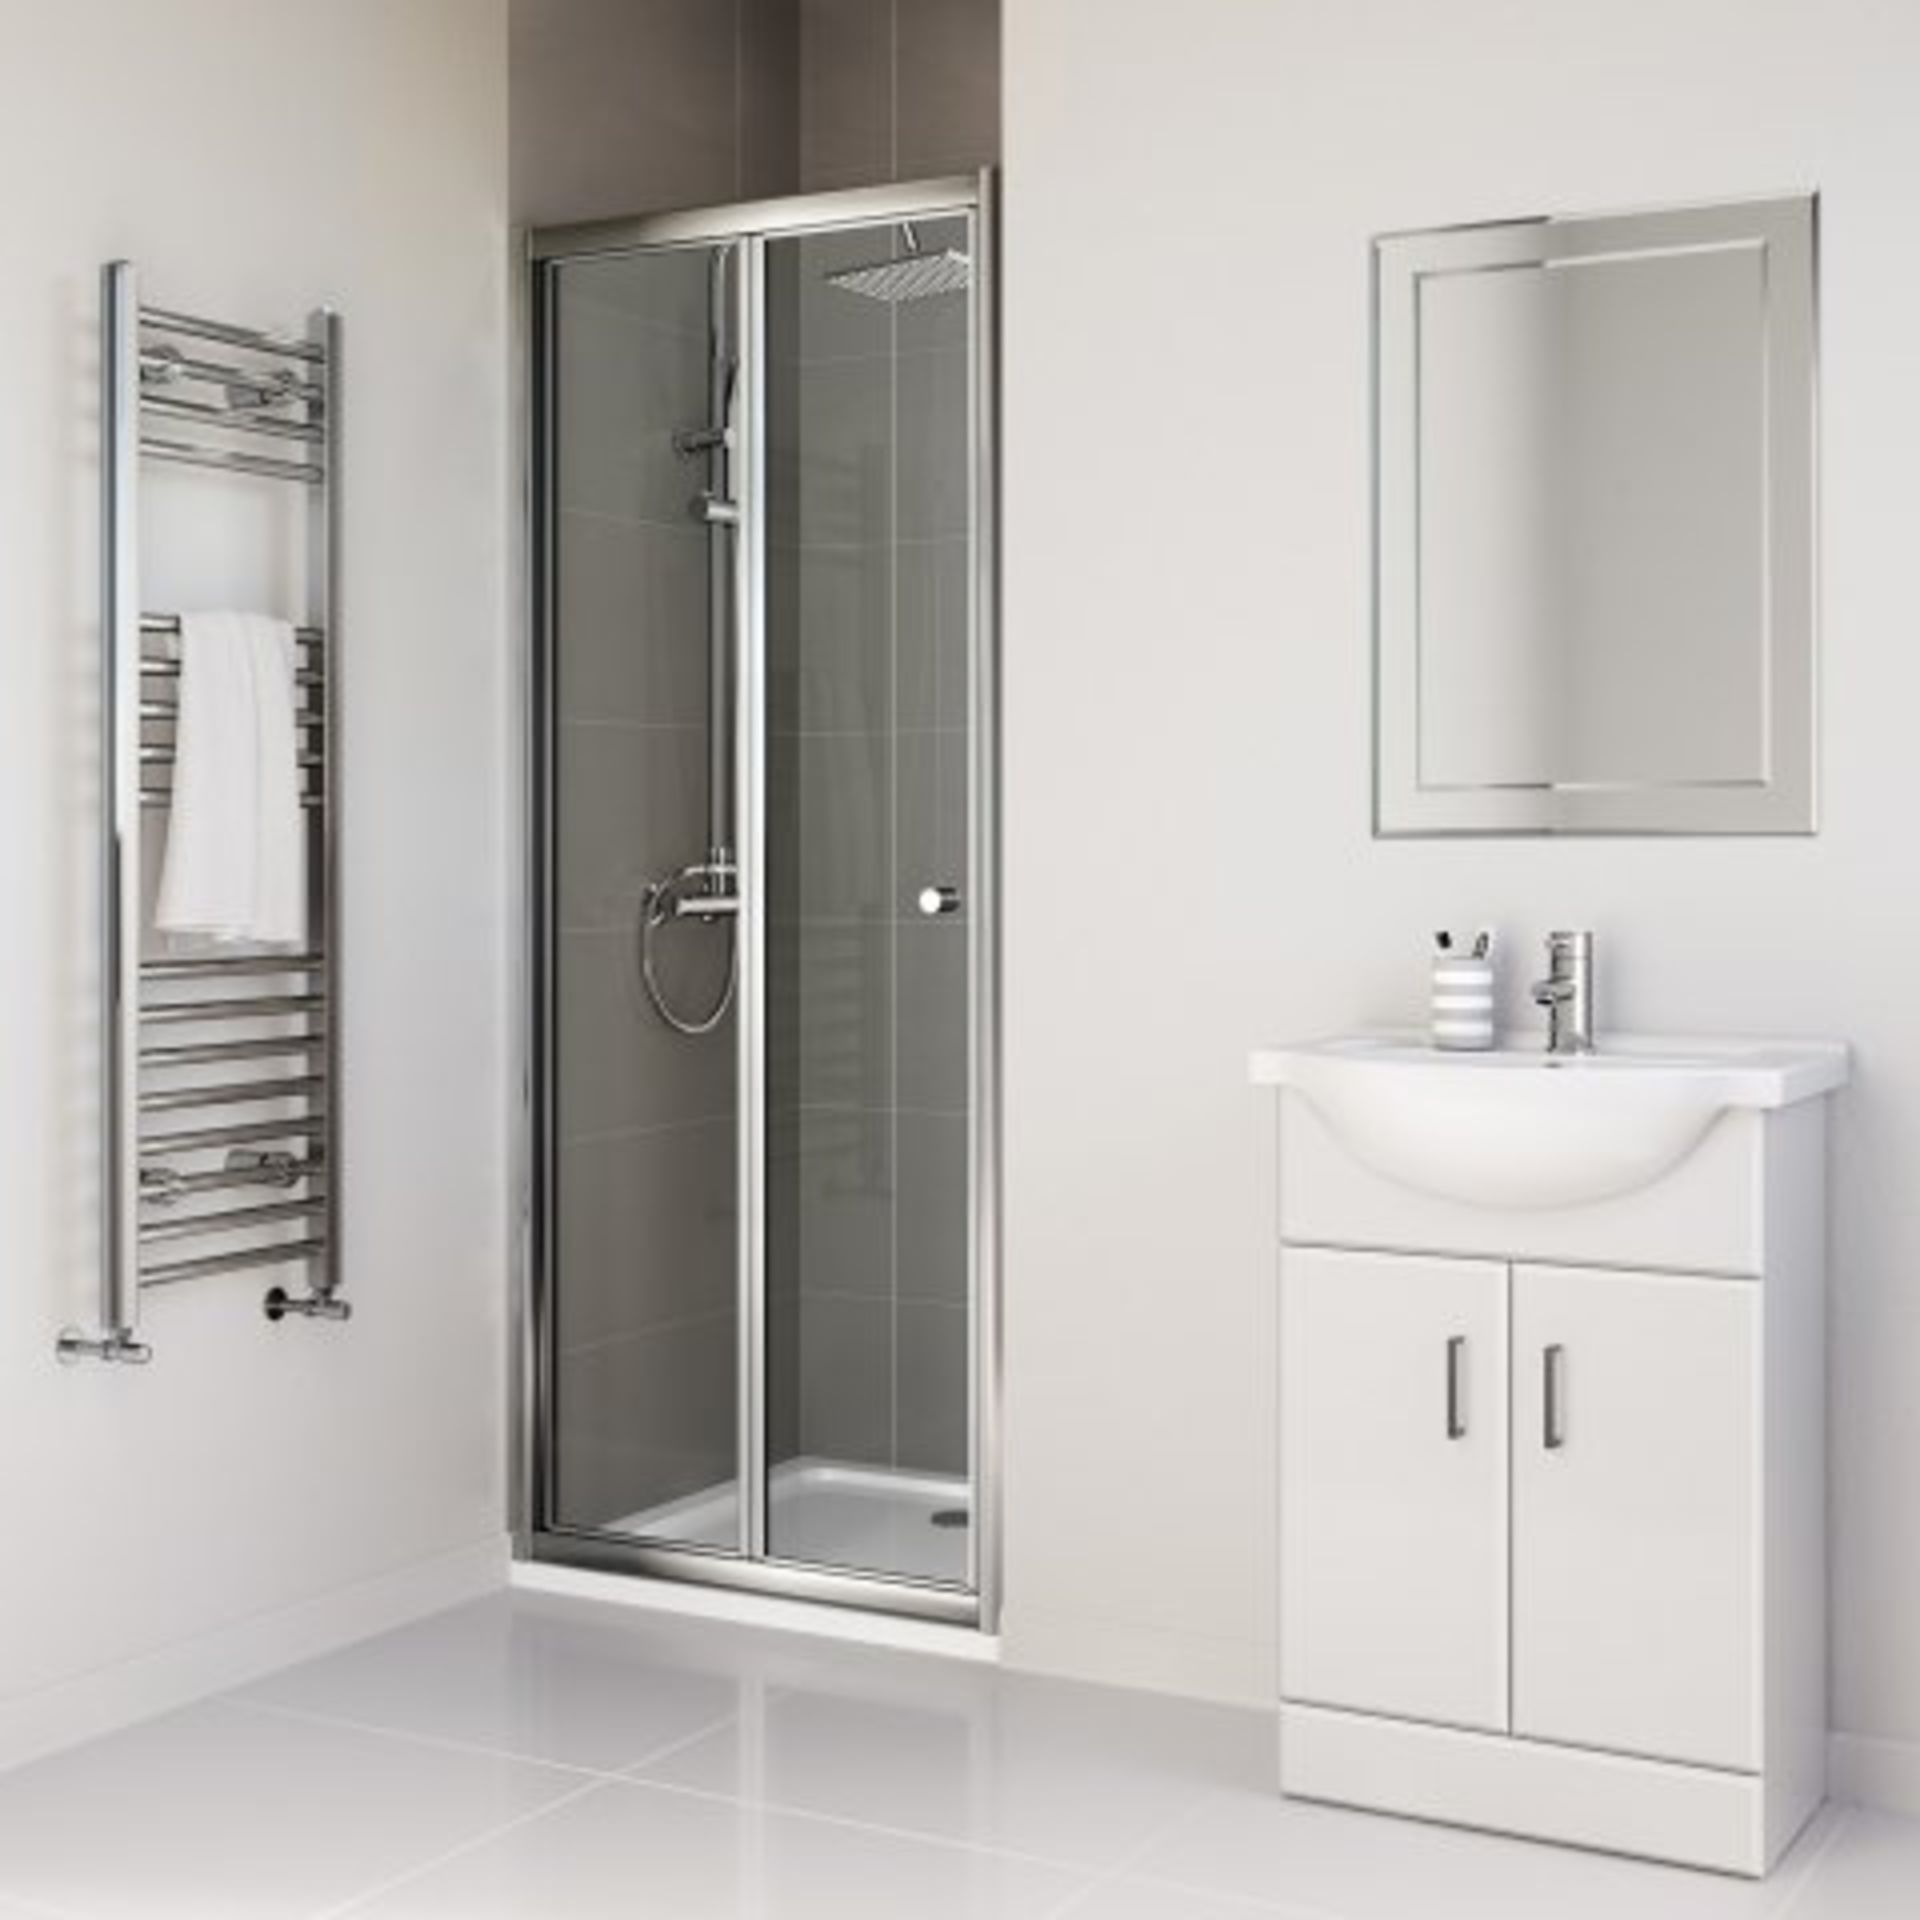 (H246) 800mm - Elements Bi Fold Shower Door. RRP £299.99. Do you have an awkward nook or a tricky - Image 2 of 3